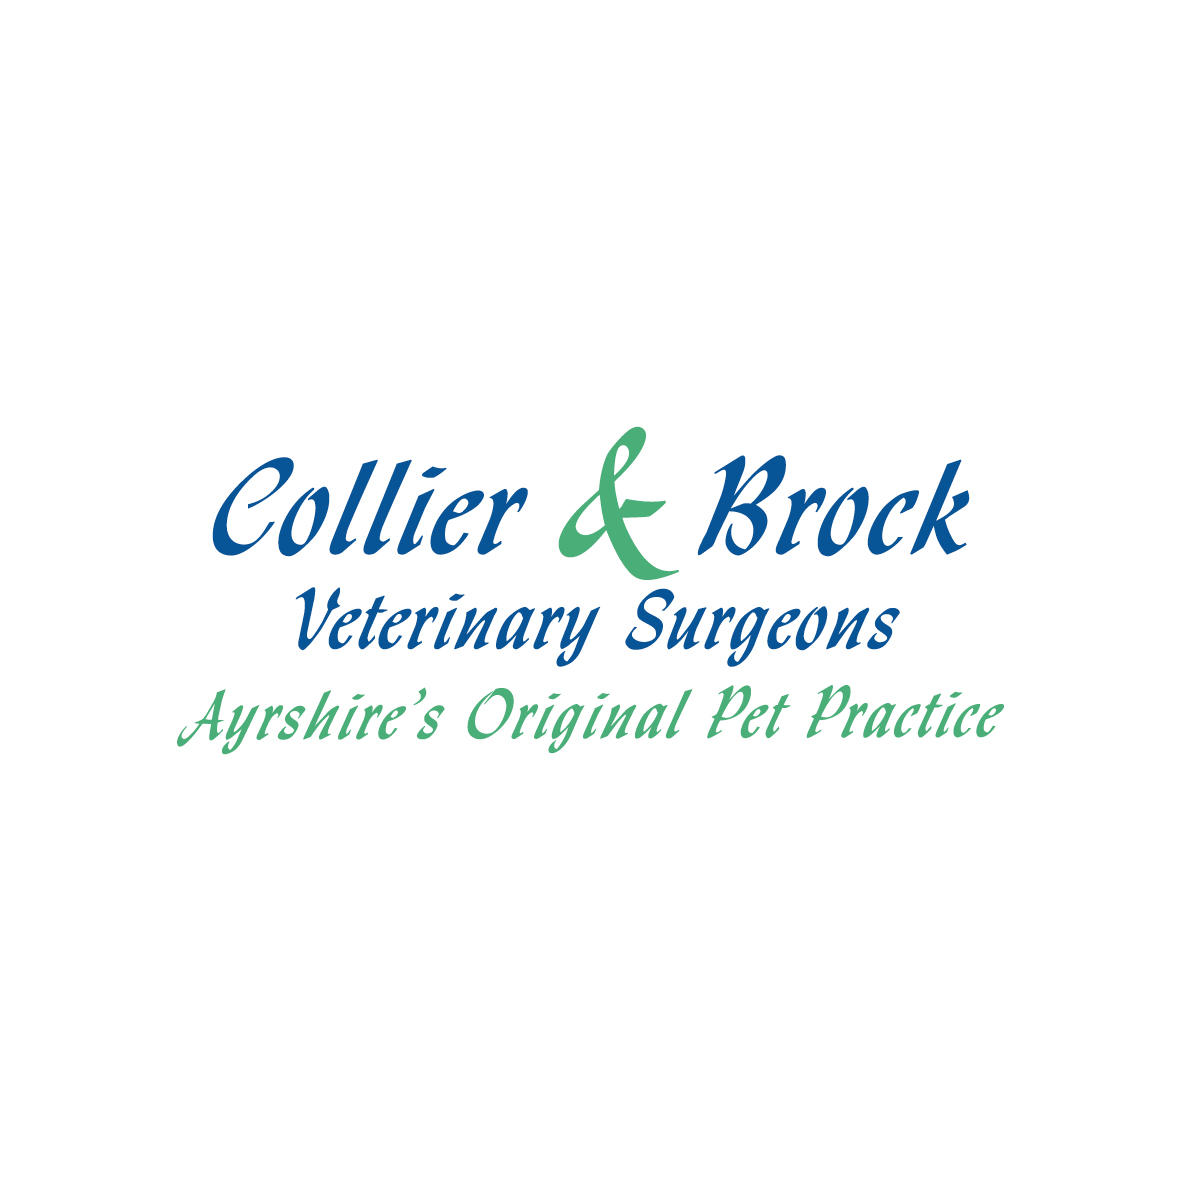 Collier and Brock Vets, Troon - Troon, Ayrshire KA10 6QU - 01292 311988 | ShowMeLocal.com